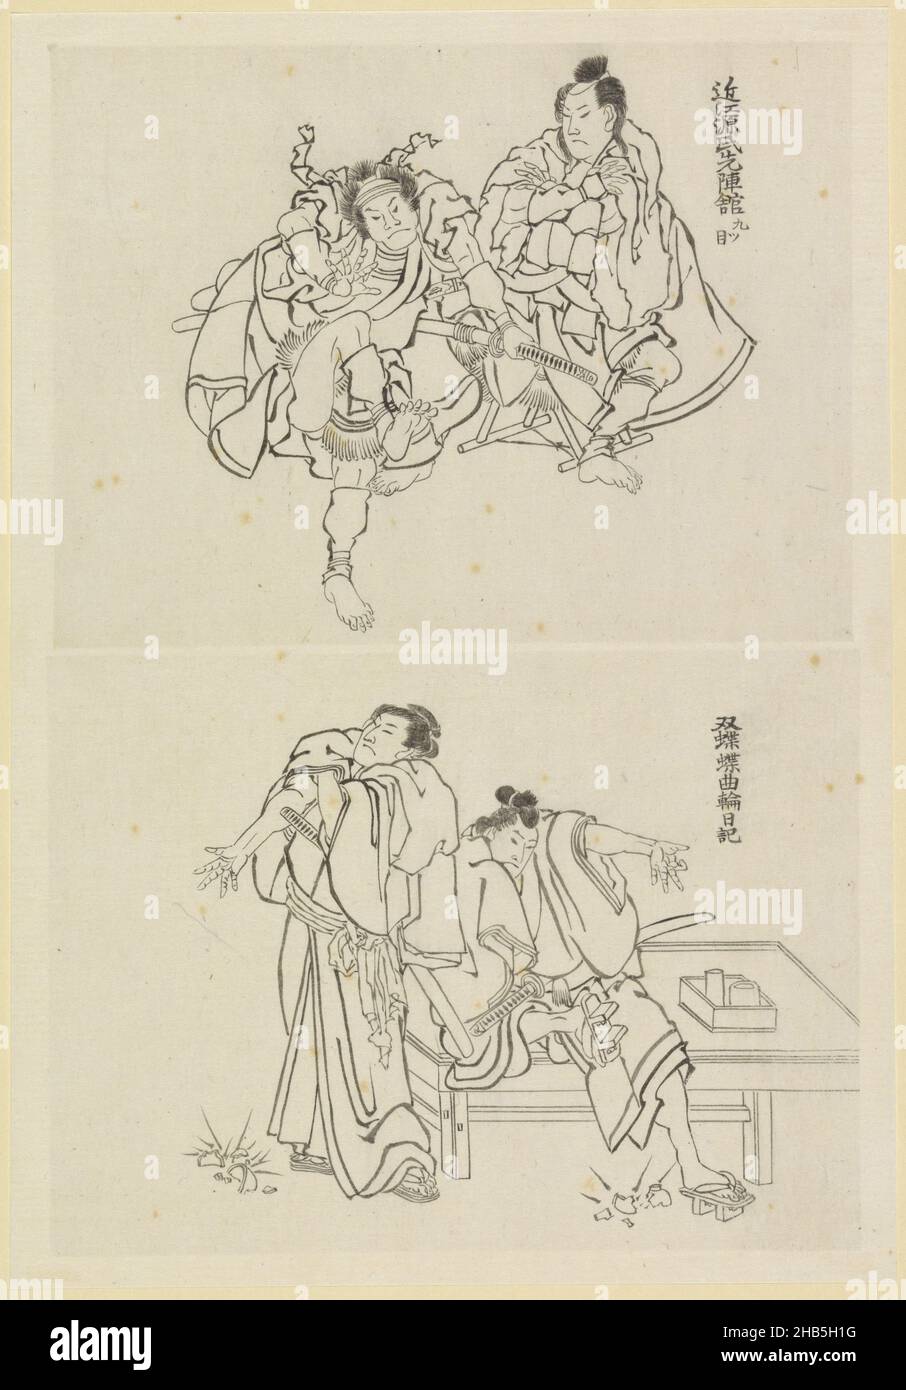 Two stage scenes, one with two samurai and one with two figures at a table, Sheet with two taped drawings showing stage scenes: one with two samurai and one with two figures at a low table. An inscription gives the names of the plays., draughtsman: Katsushika Hokusai, Japan, 1800 - 1900, paper, brush, height 285 mm × width 198 mmheight 135 mm × width 180 mm Stock Photo